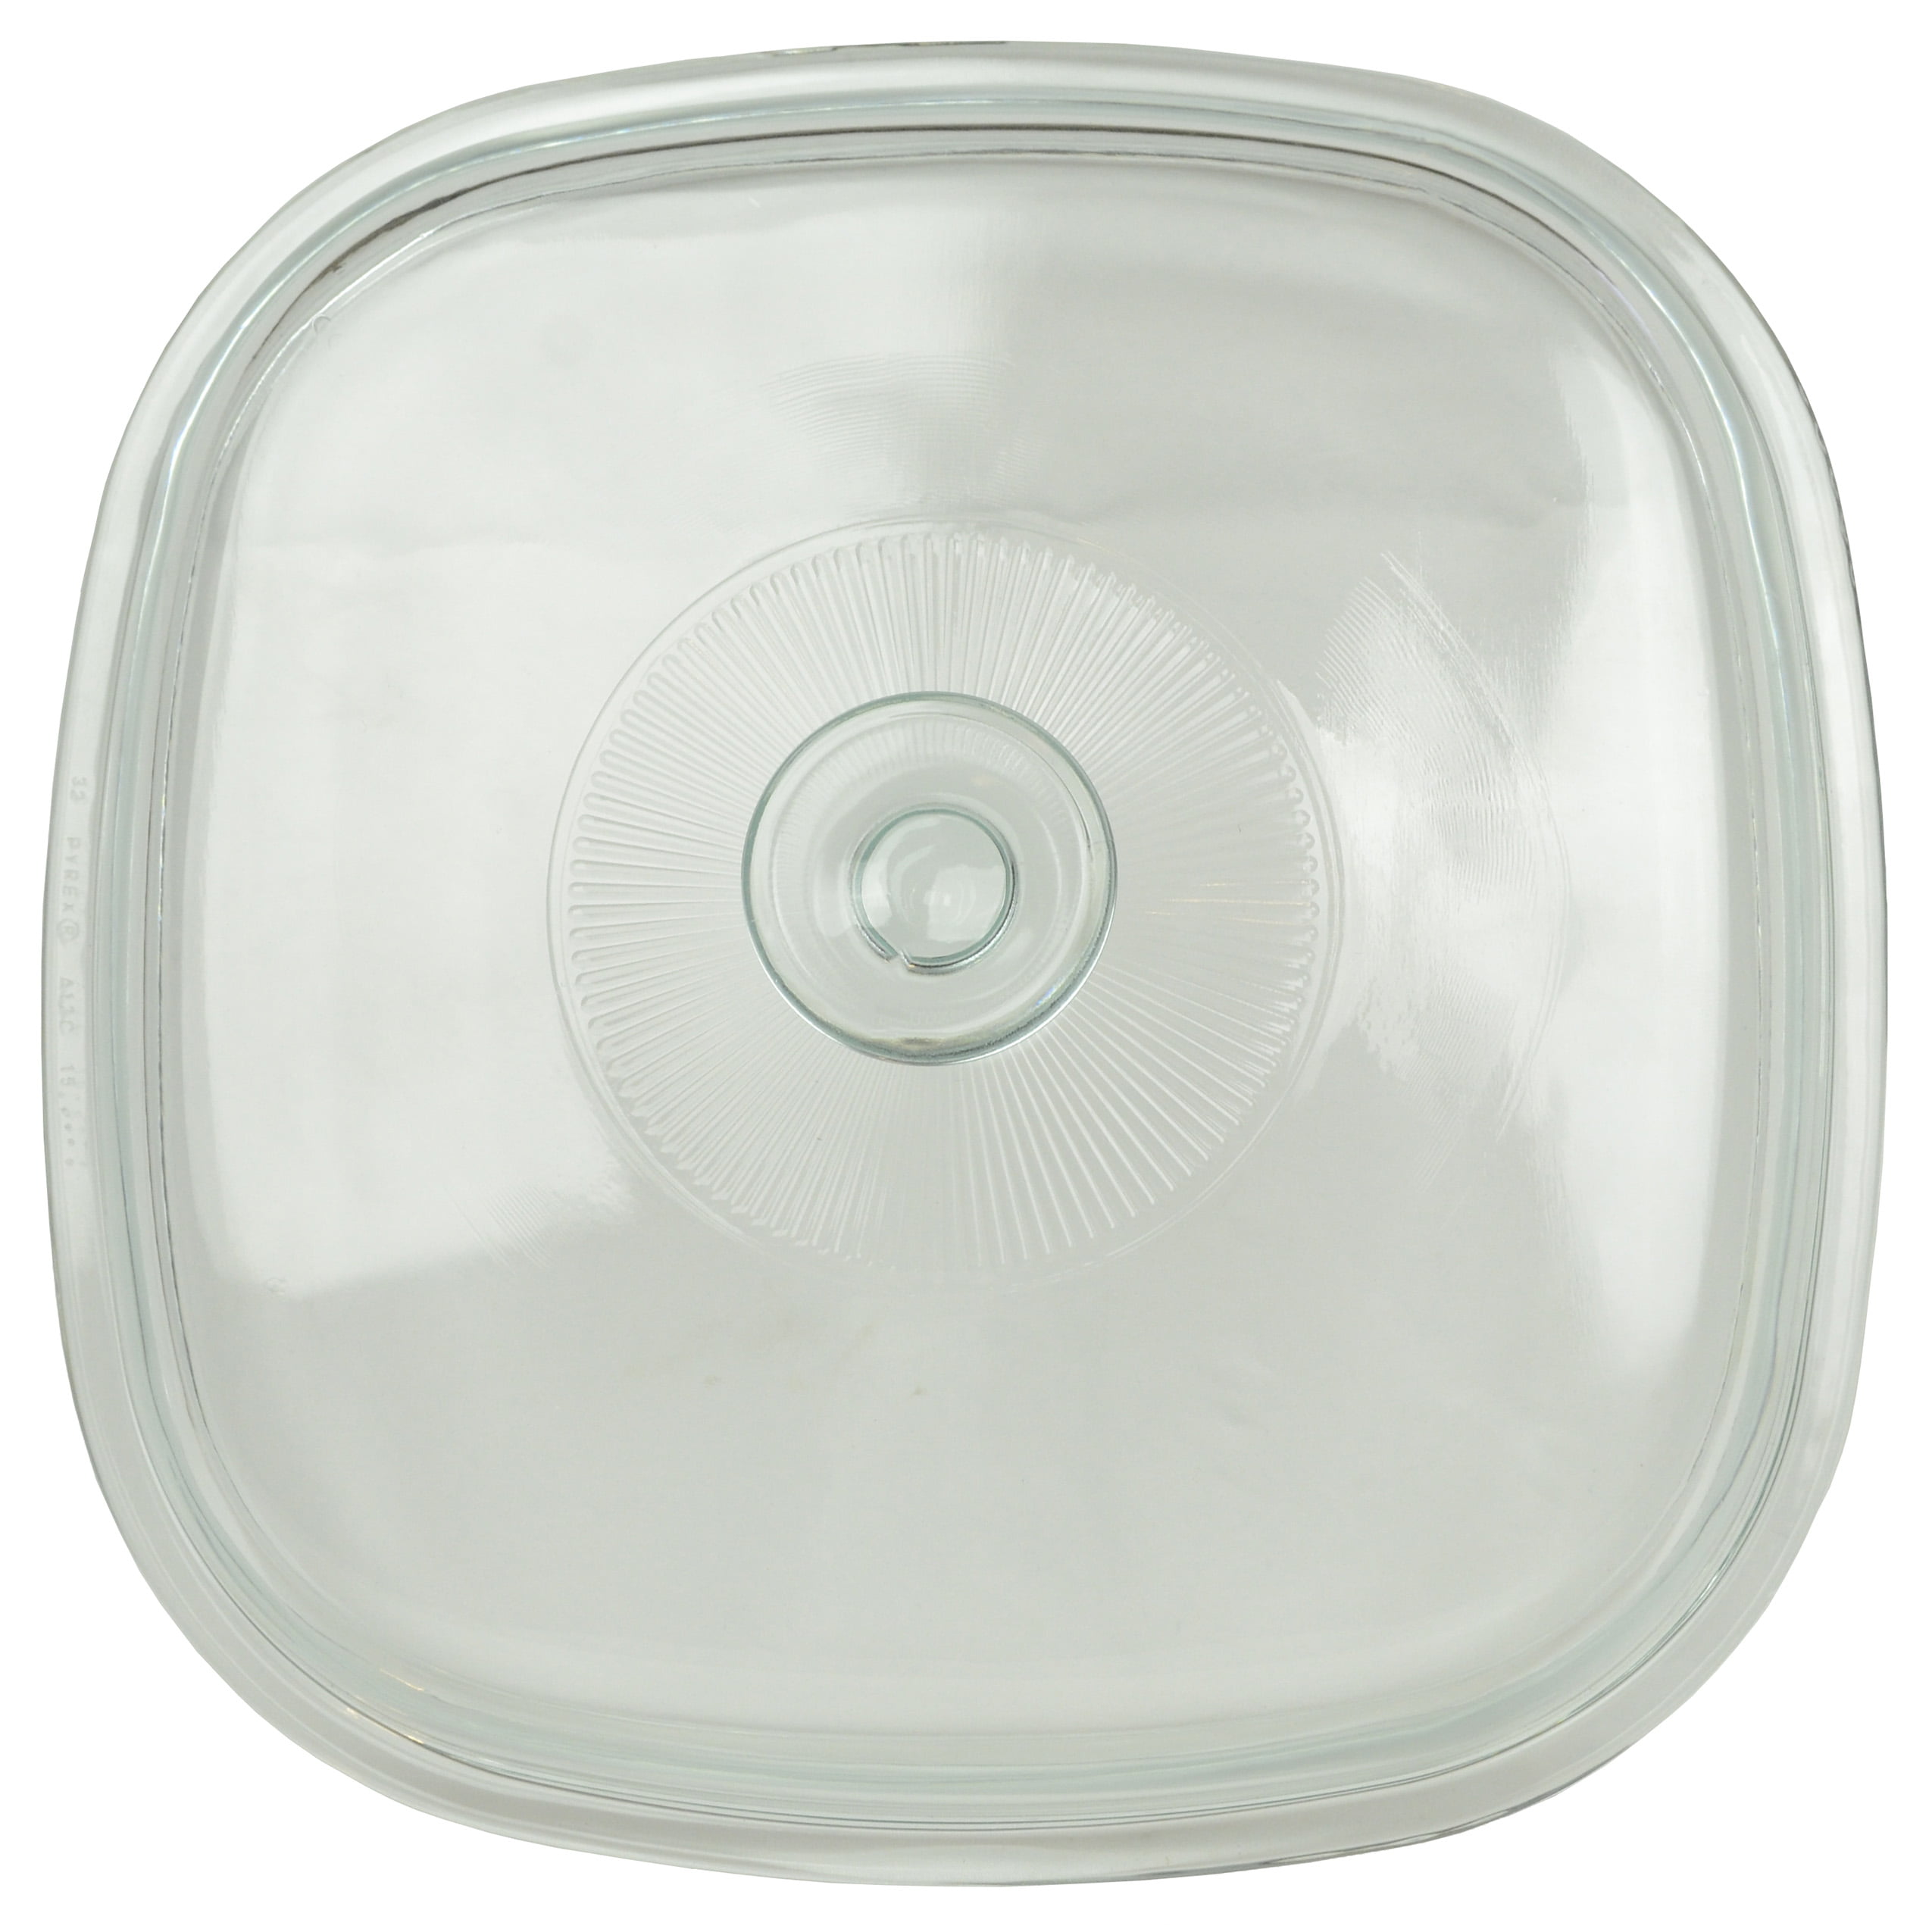 Glass Square storage leakproof dish with lid - Ôcuisine cookware